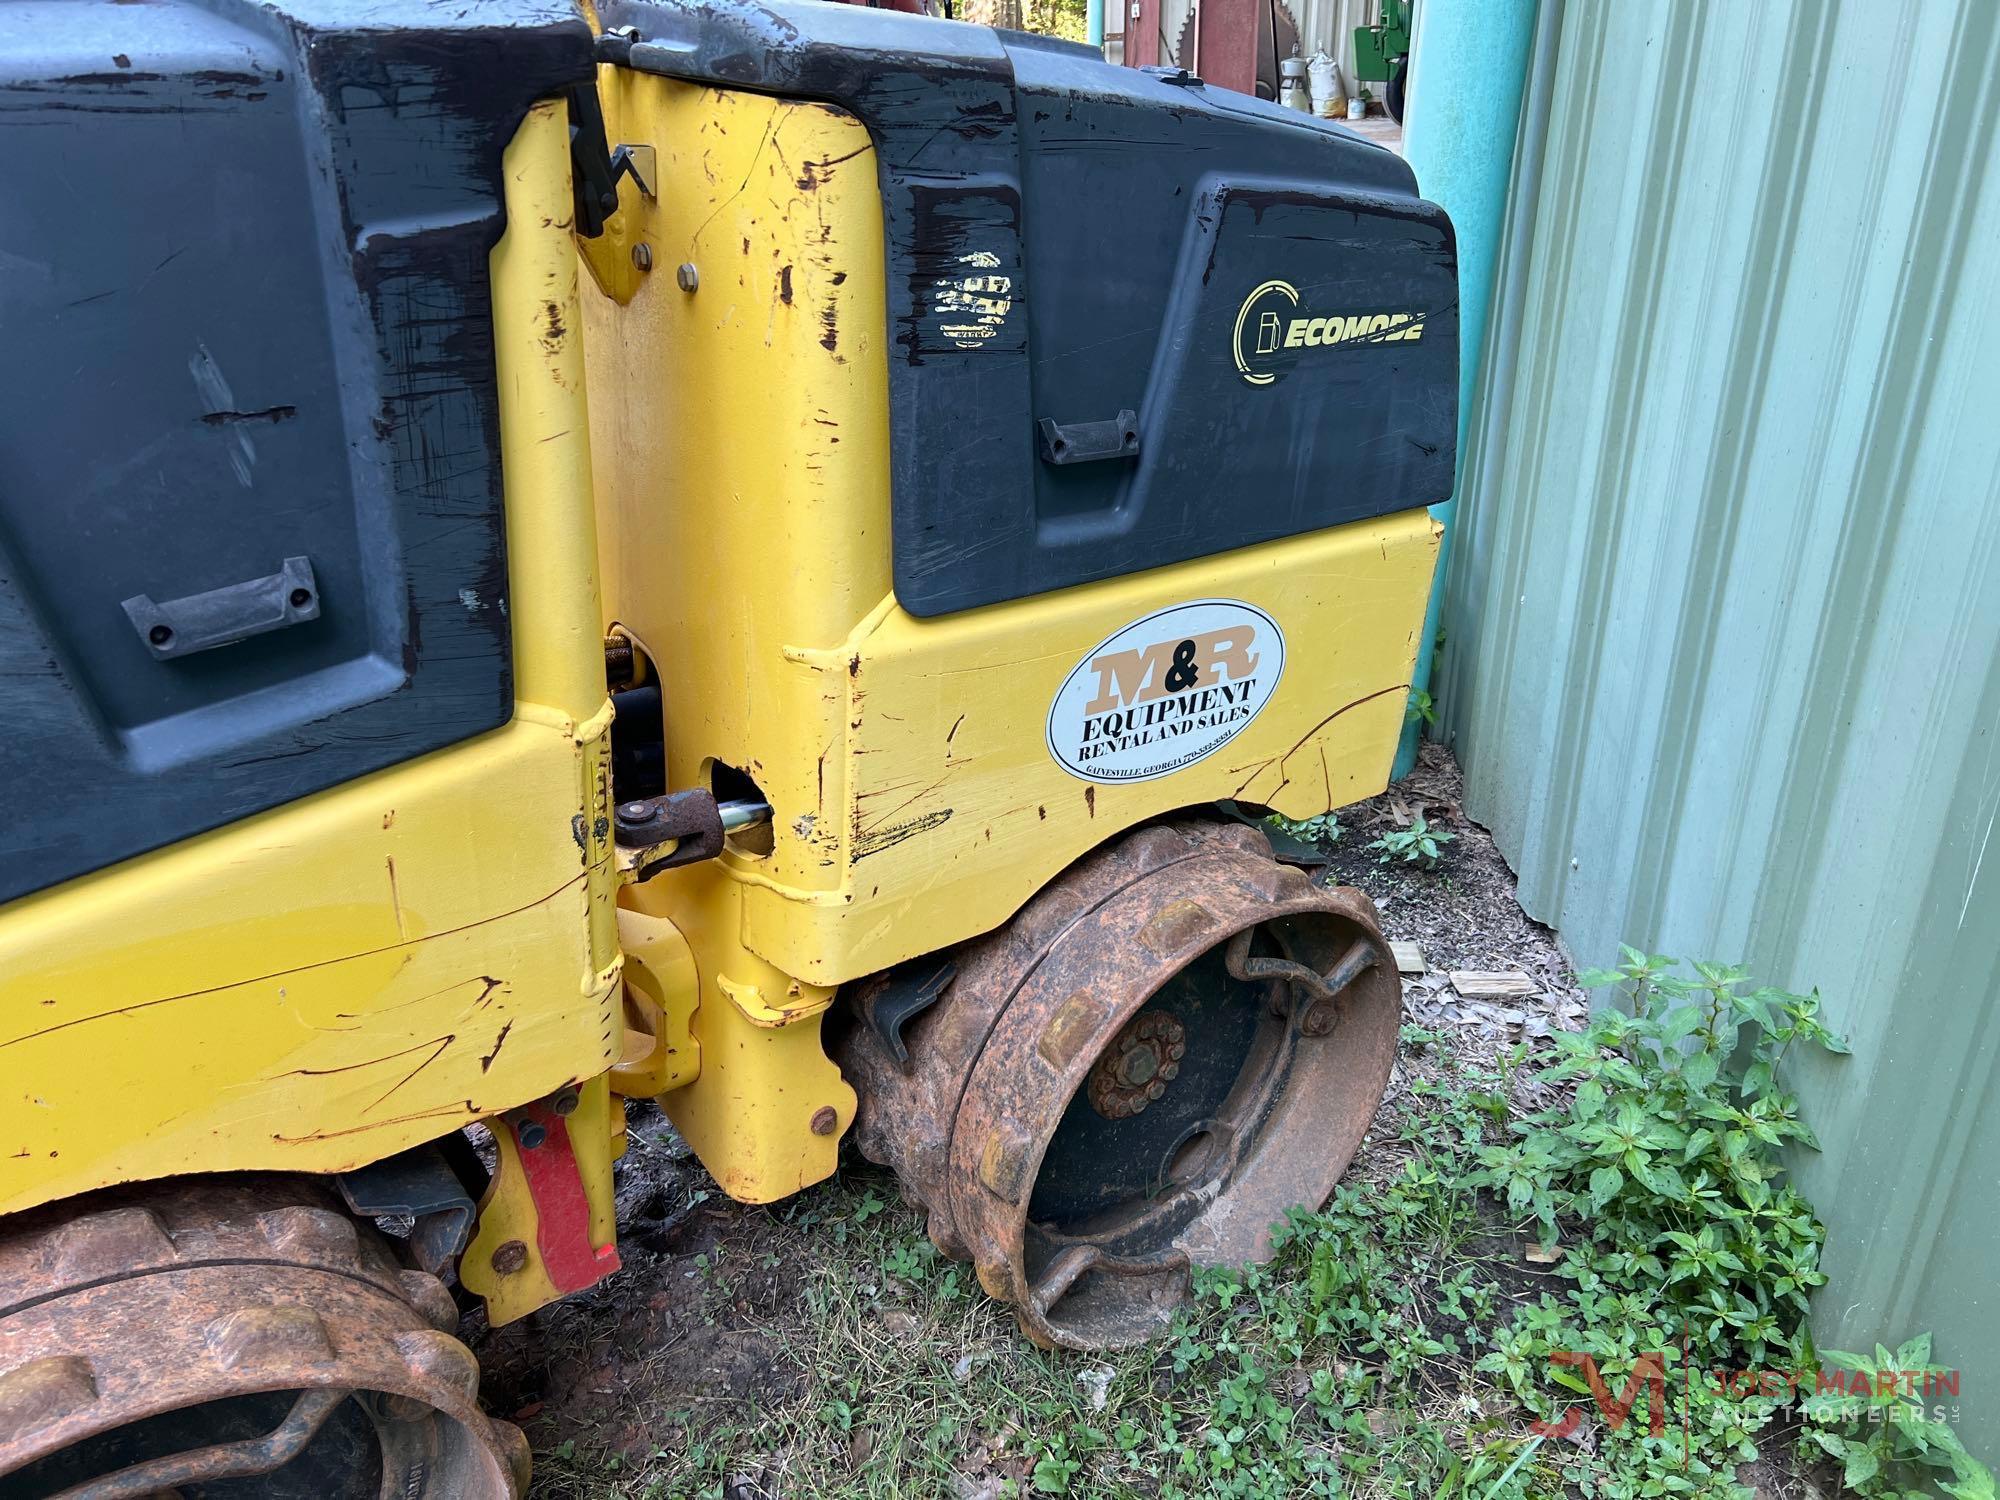 2012 BOMAG BMP8500 TRENCH COMPACTOR